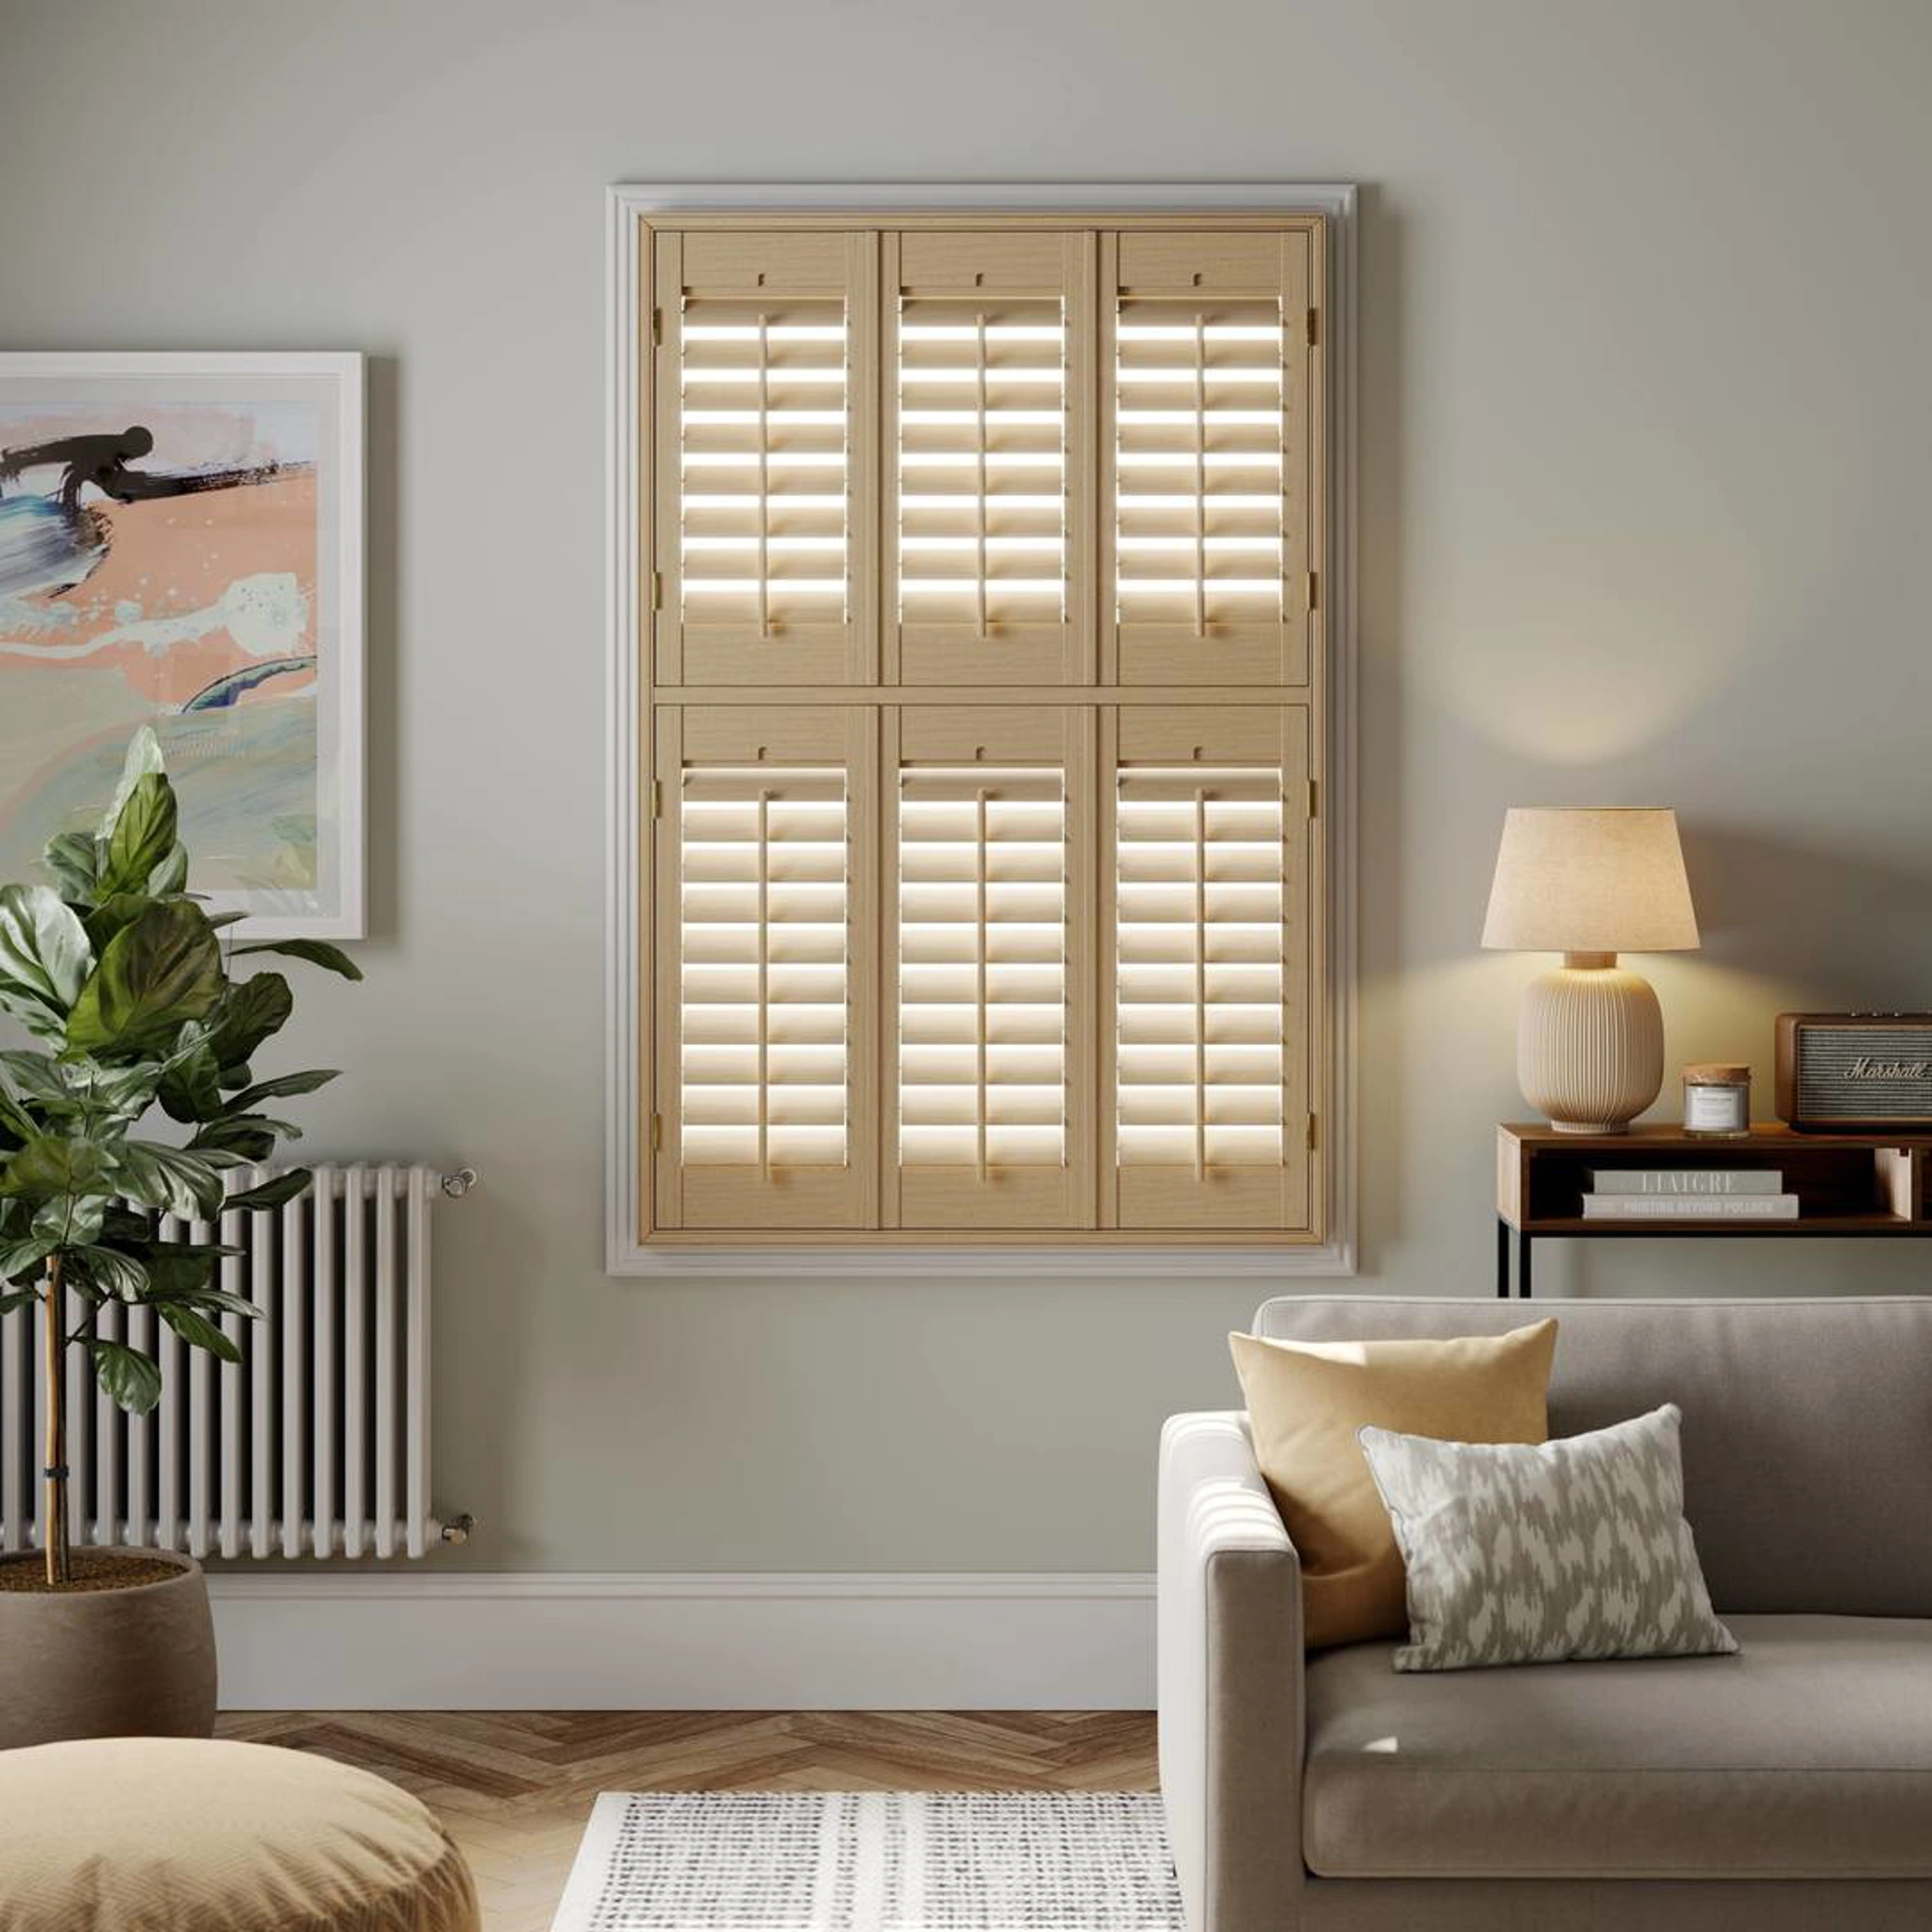 Tier on tier Natural Stained wooden shutters on sash window